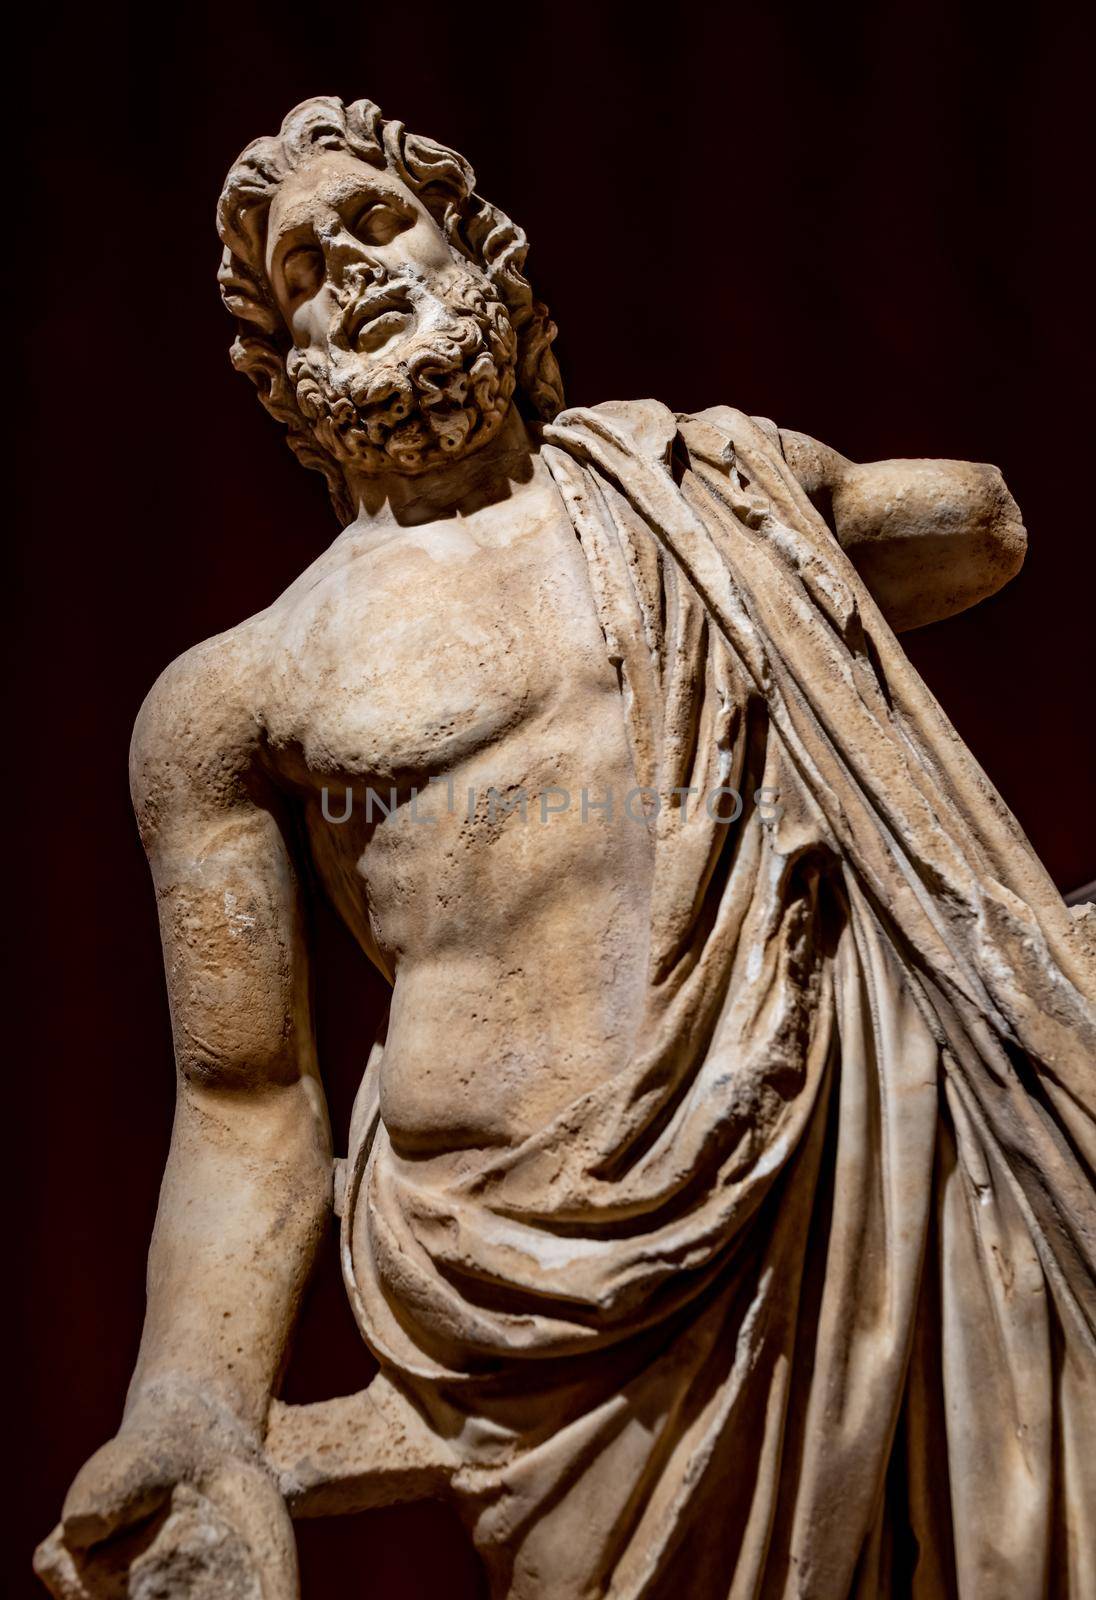 ANTALYA, TURKEY - JANUARY 18, 2020: Zeus Marble Statue. Antalya Archeological Museum is one of Turkey's largest museums located in Antalya city in Turkey